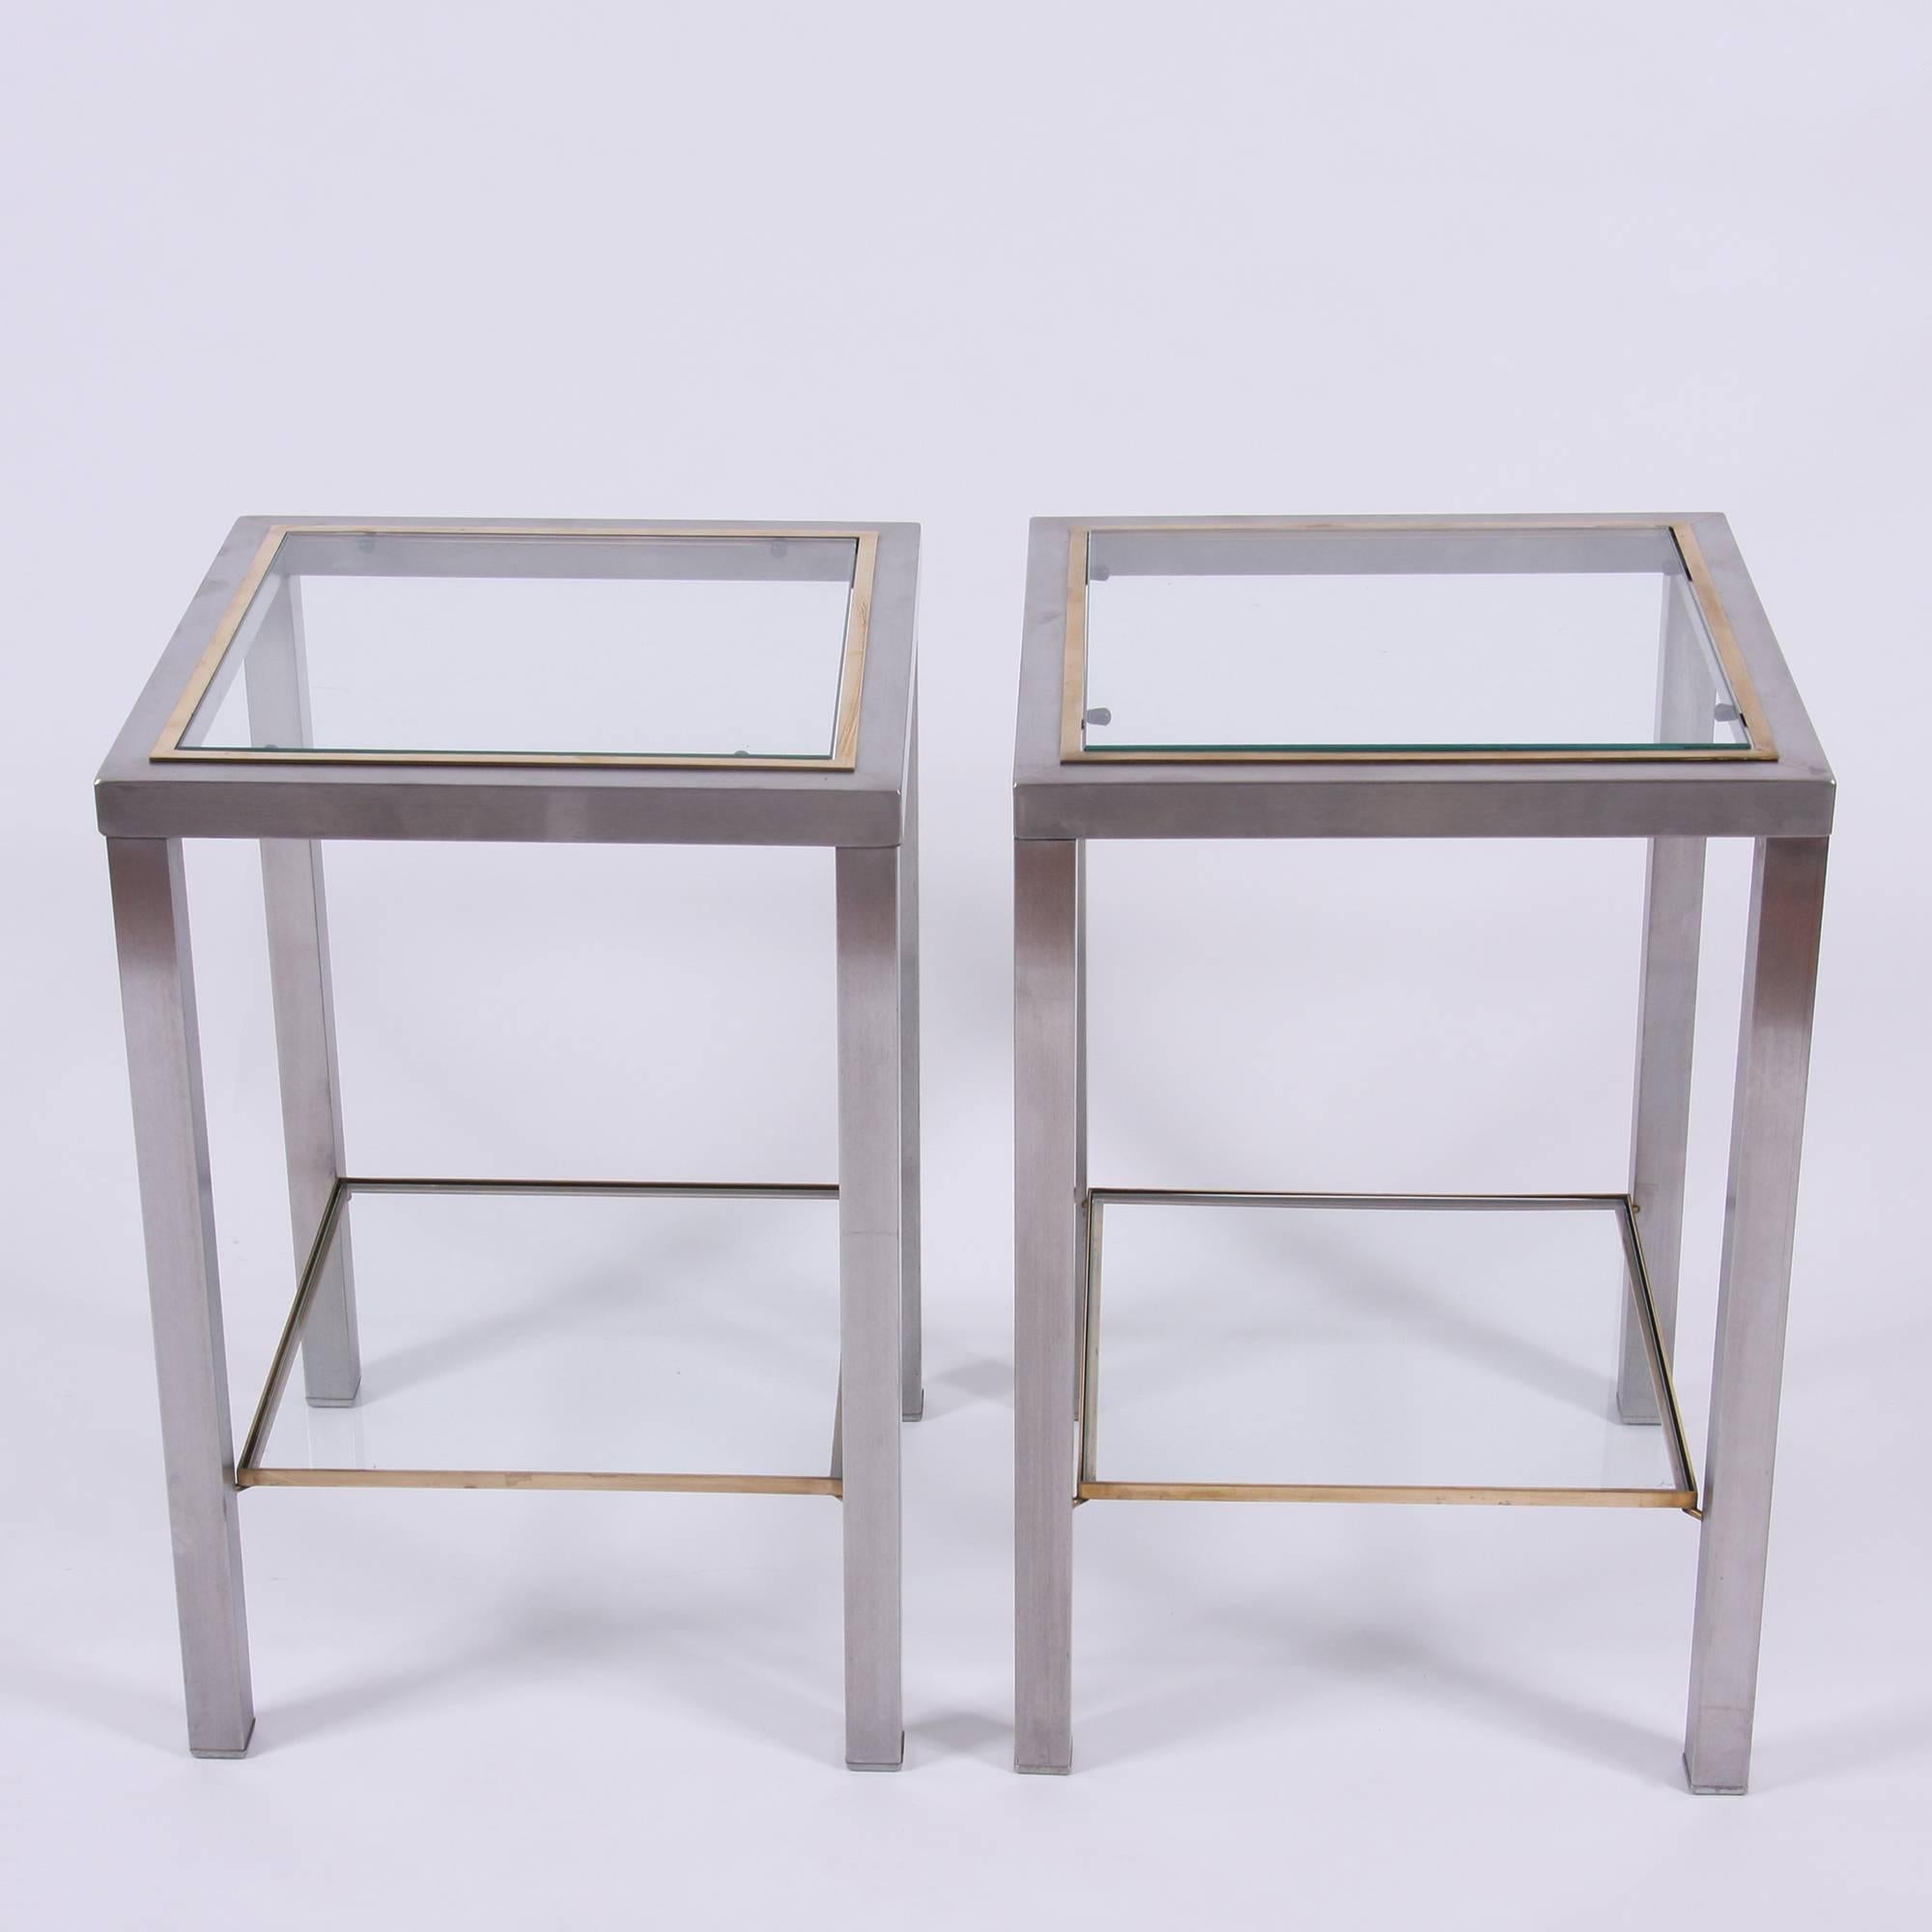 A great pair of Mid-Century two-tier side tables. These tables are made from brushed steel with brass detailing.